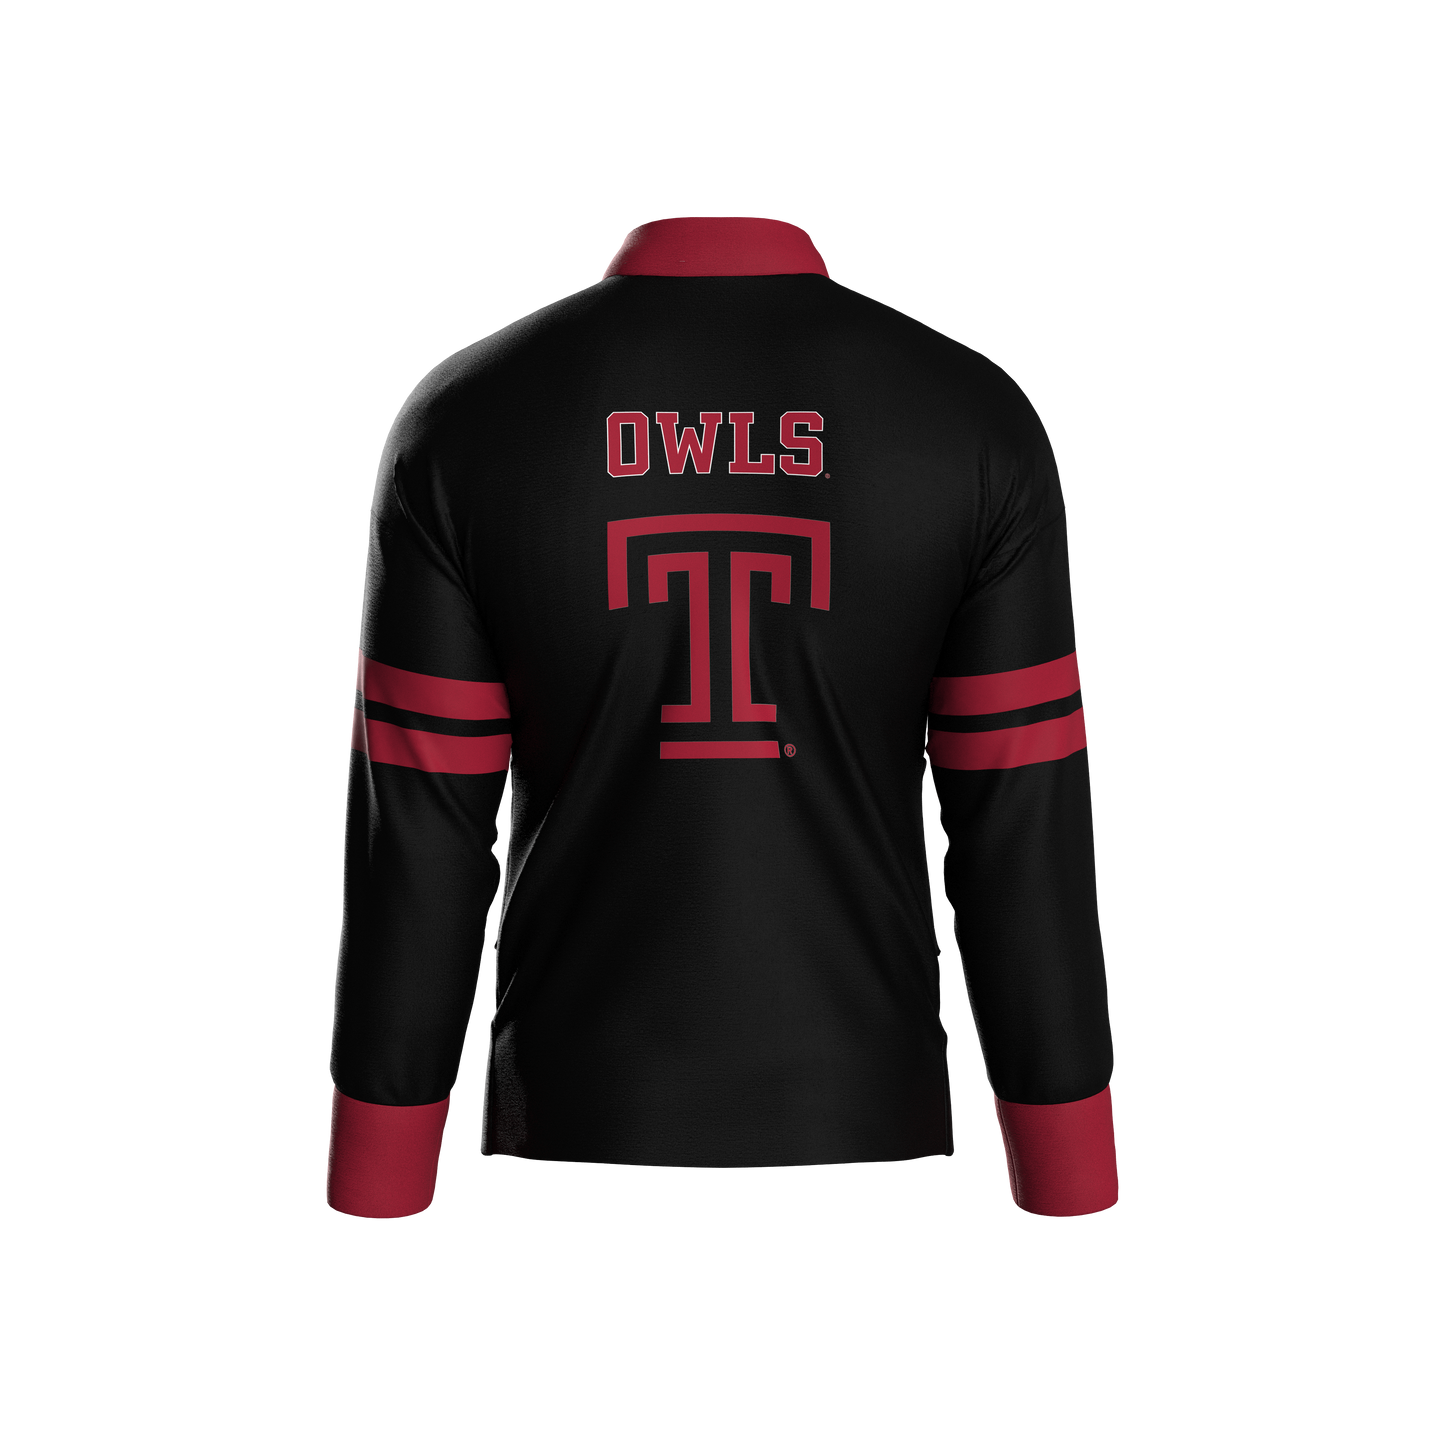 Temple University Away Zip-Up (youth)